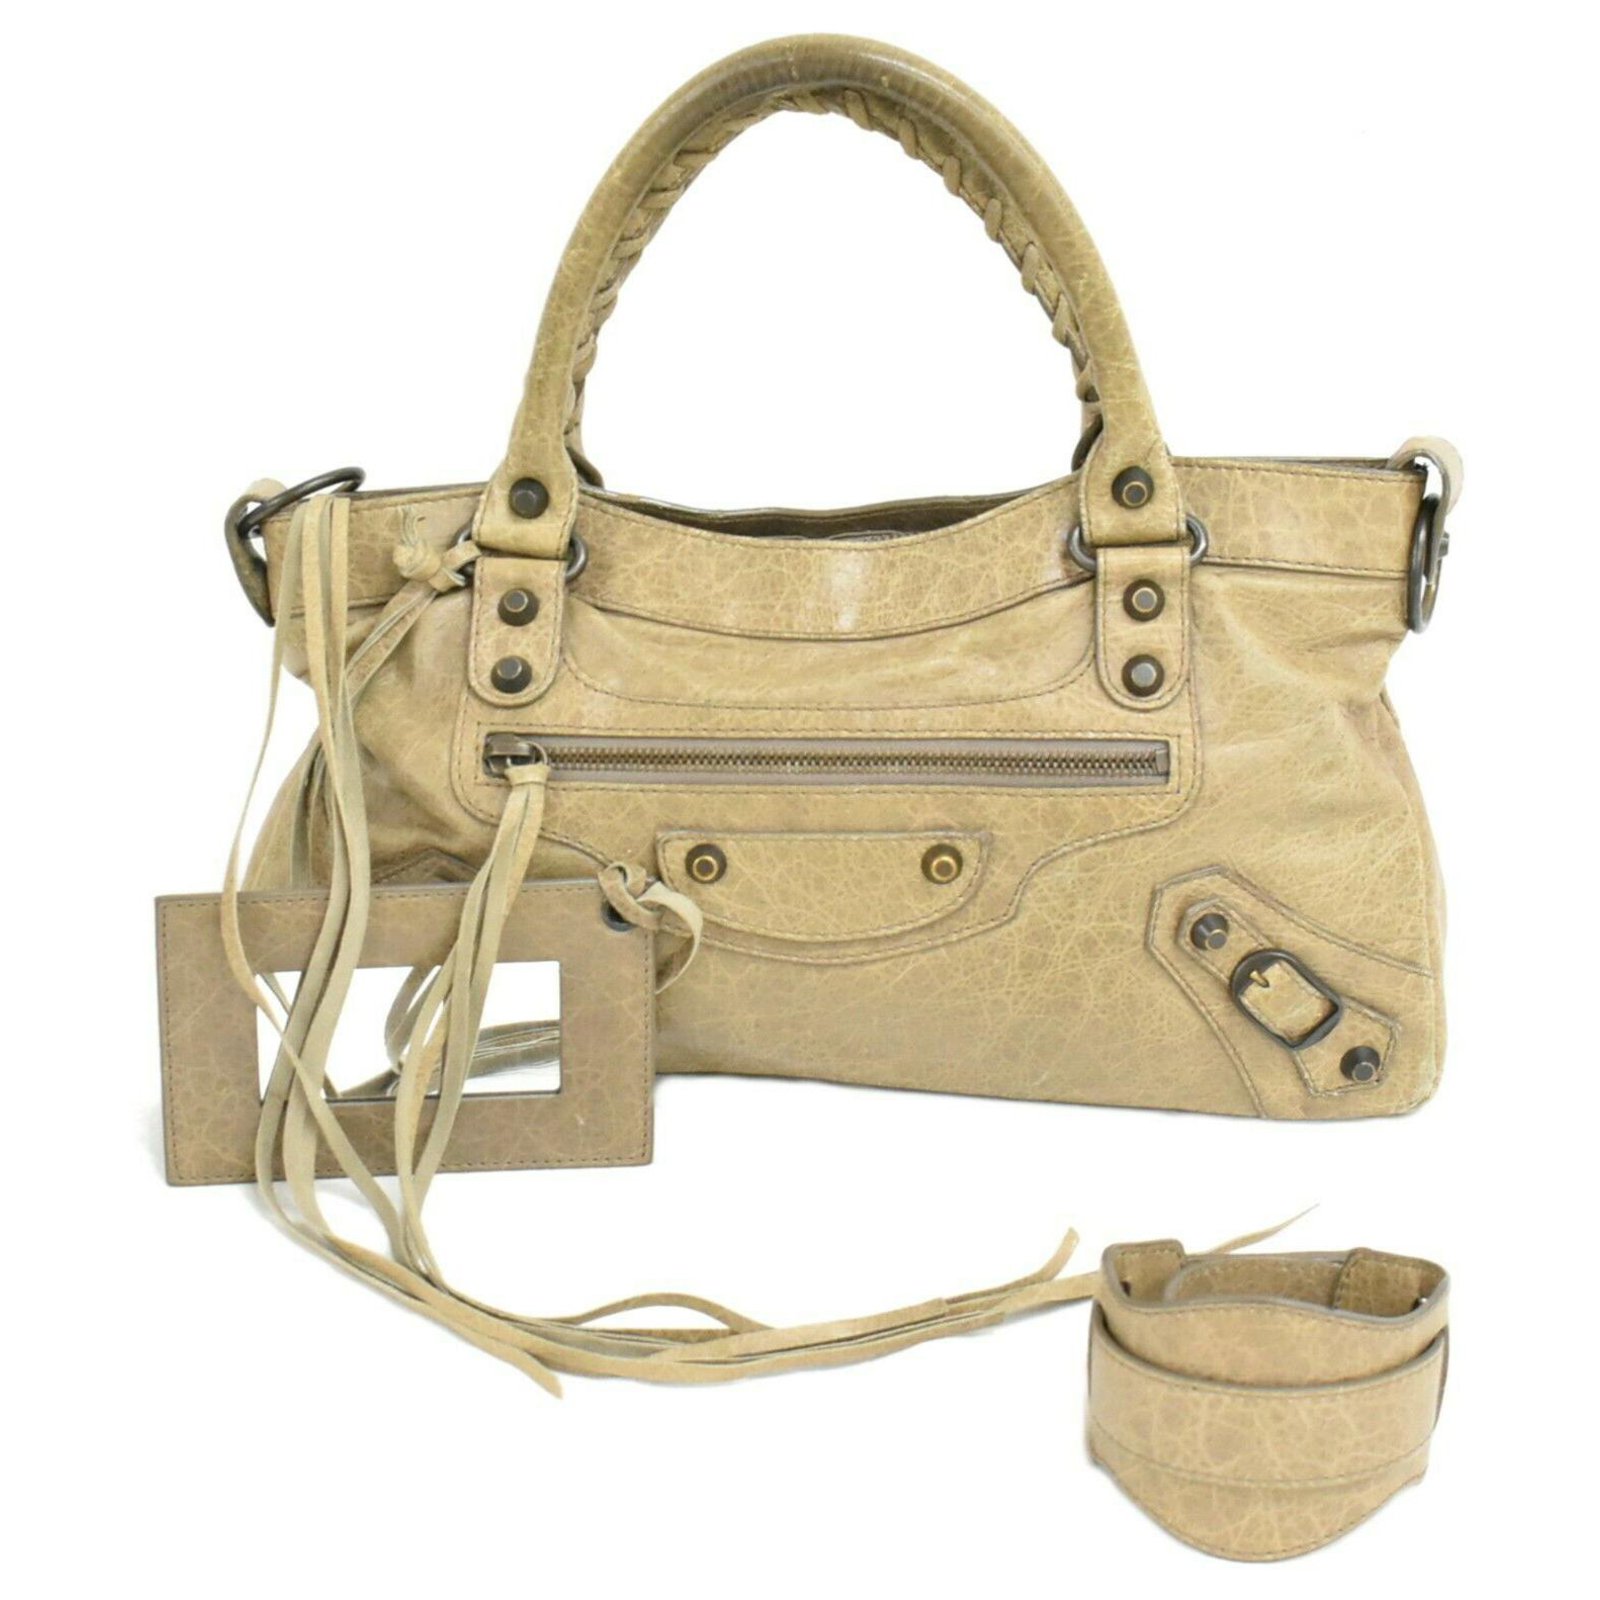 The Beige Leather ref.229462 - Closet